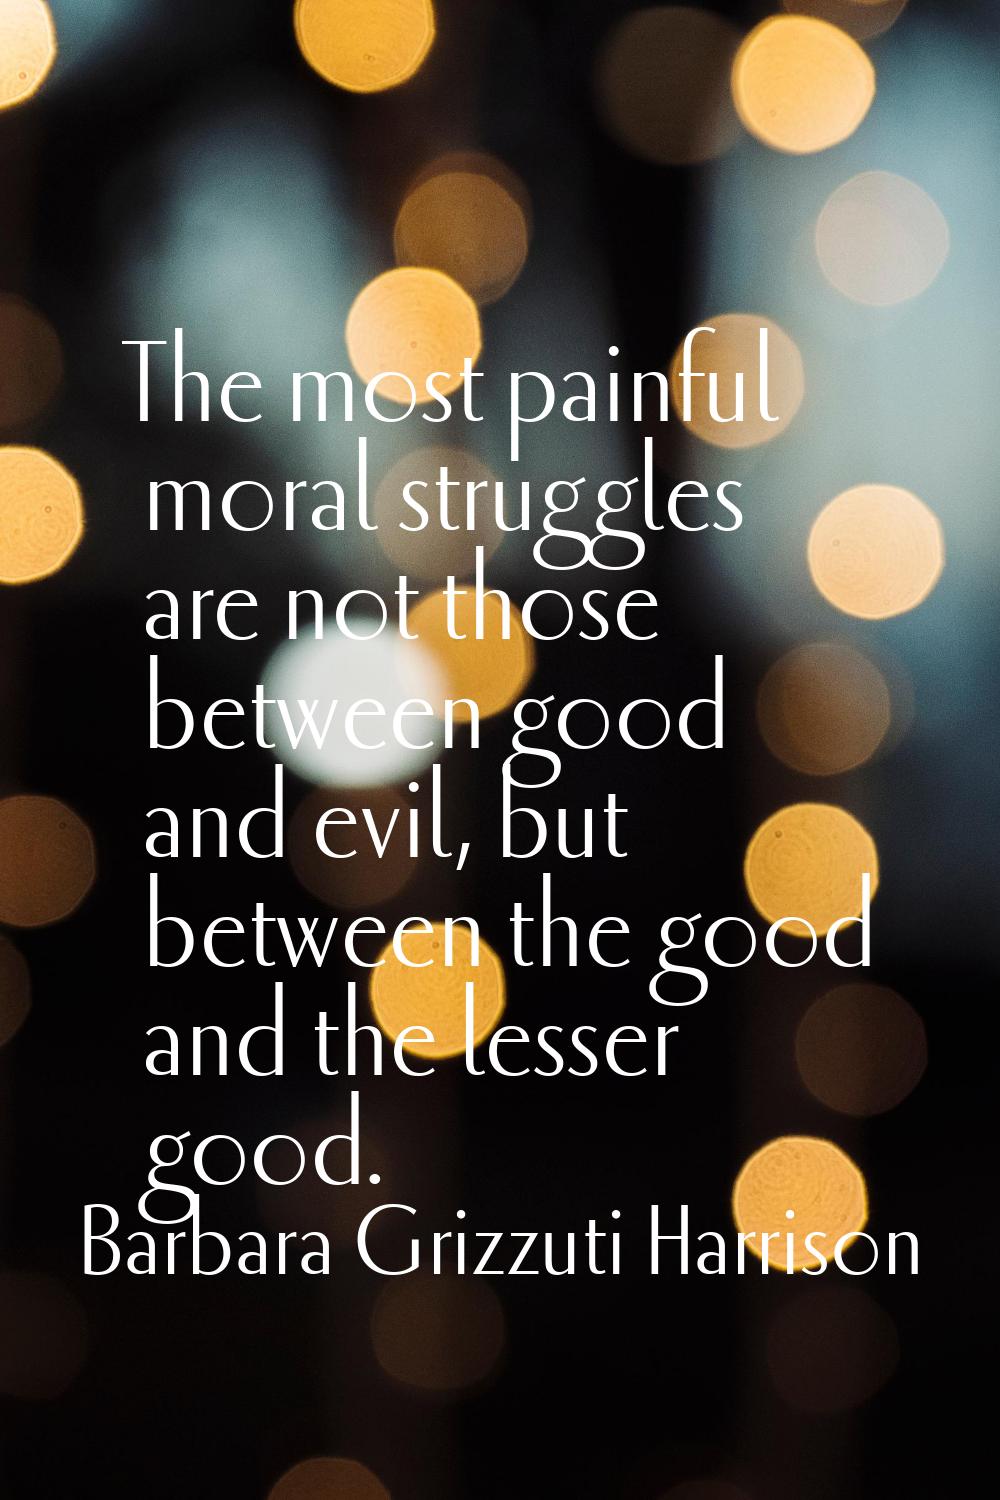 The most painful moral struggles are not those between good and evil, but between the good and the 